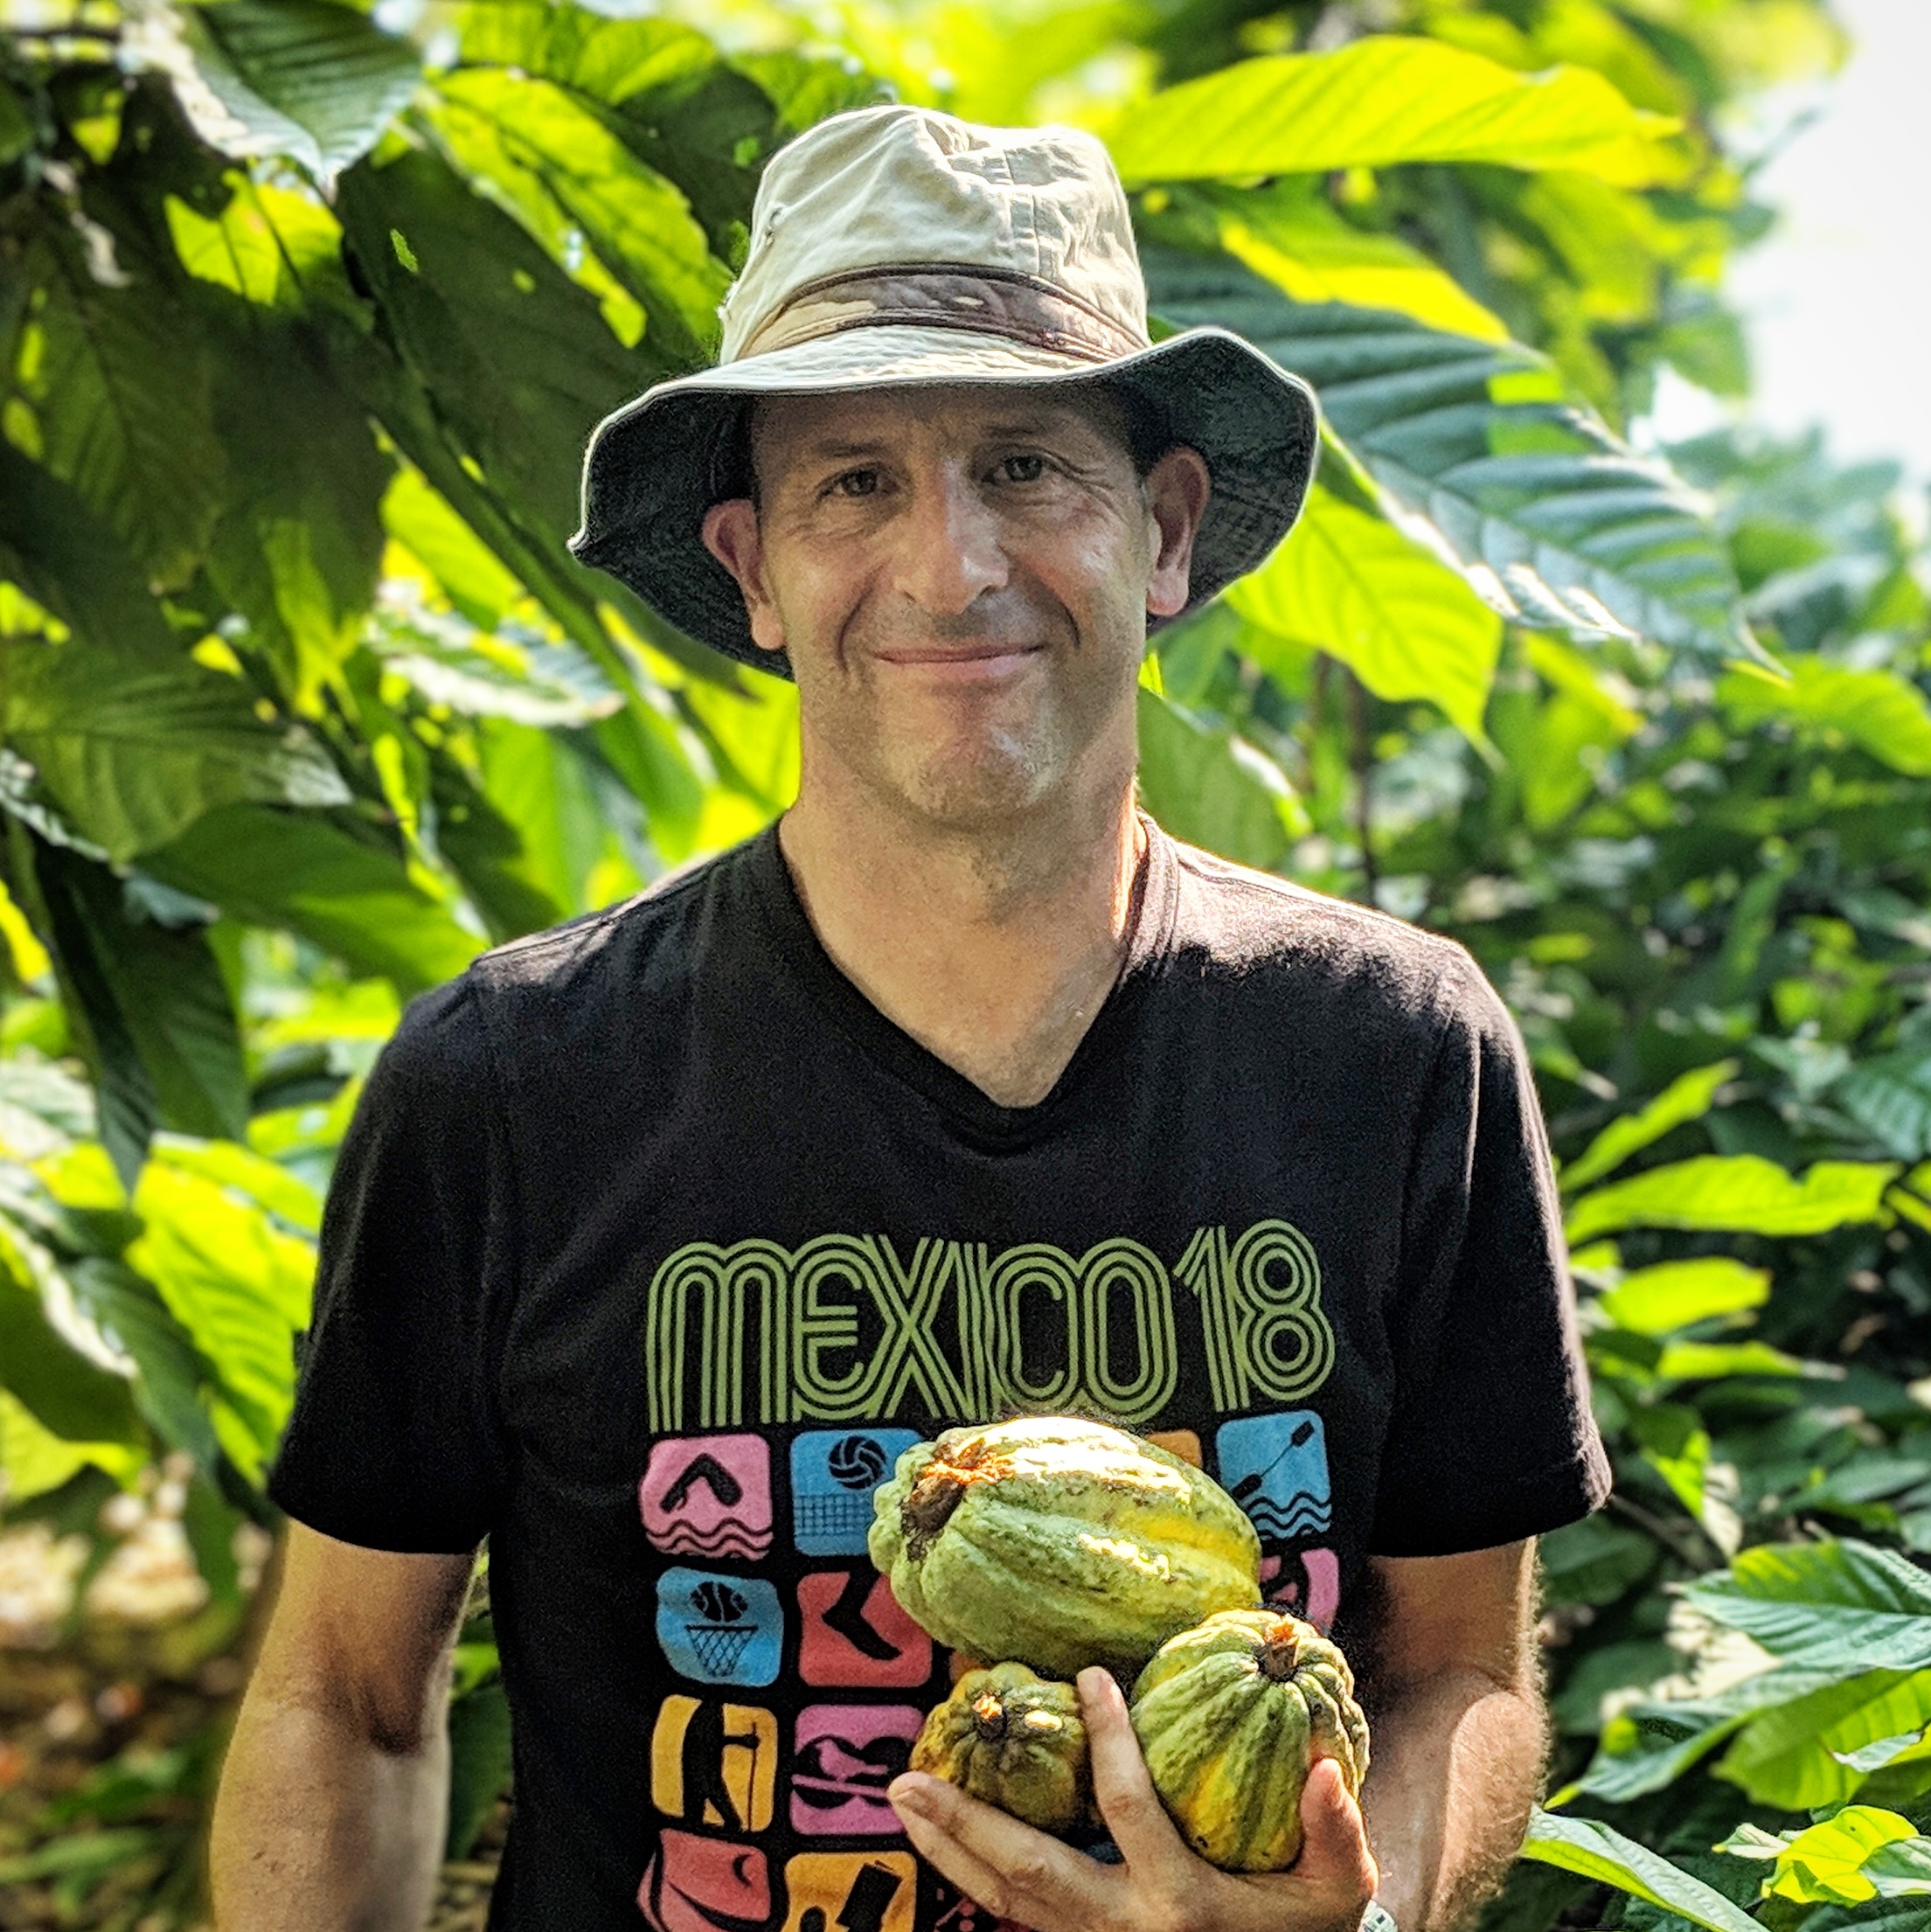 David Leventhal, a male in black tshirt, bucket hat, and fruits in his hand